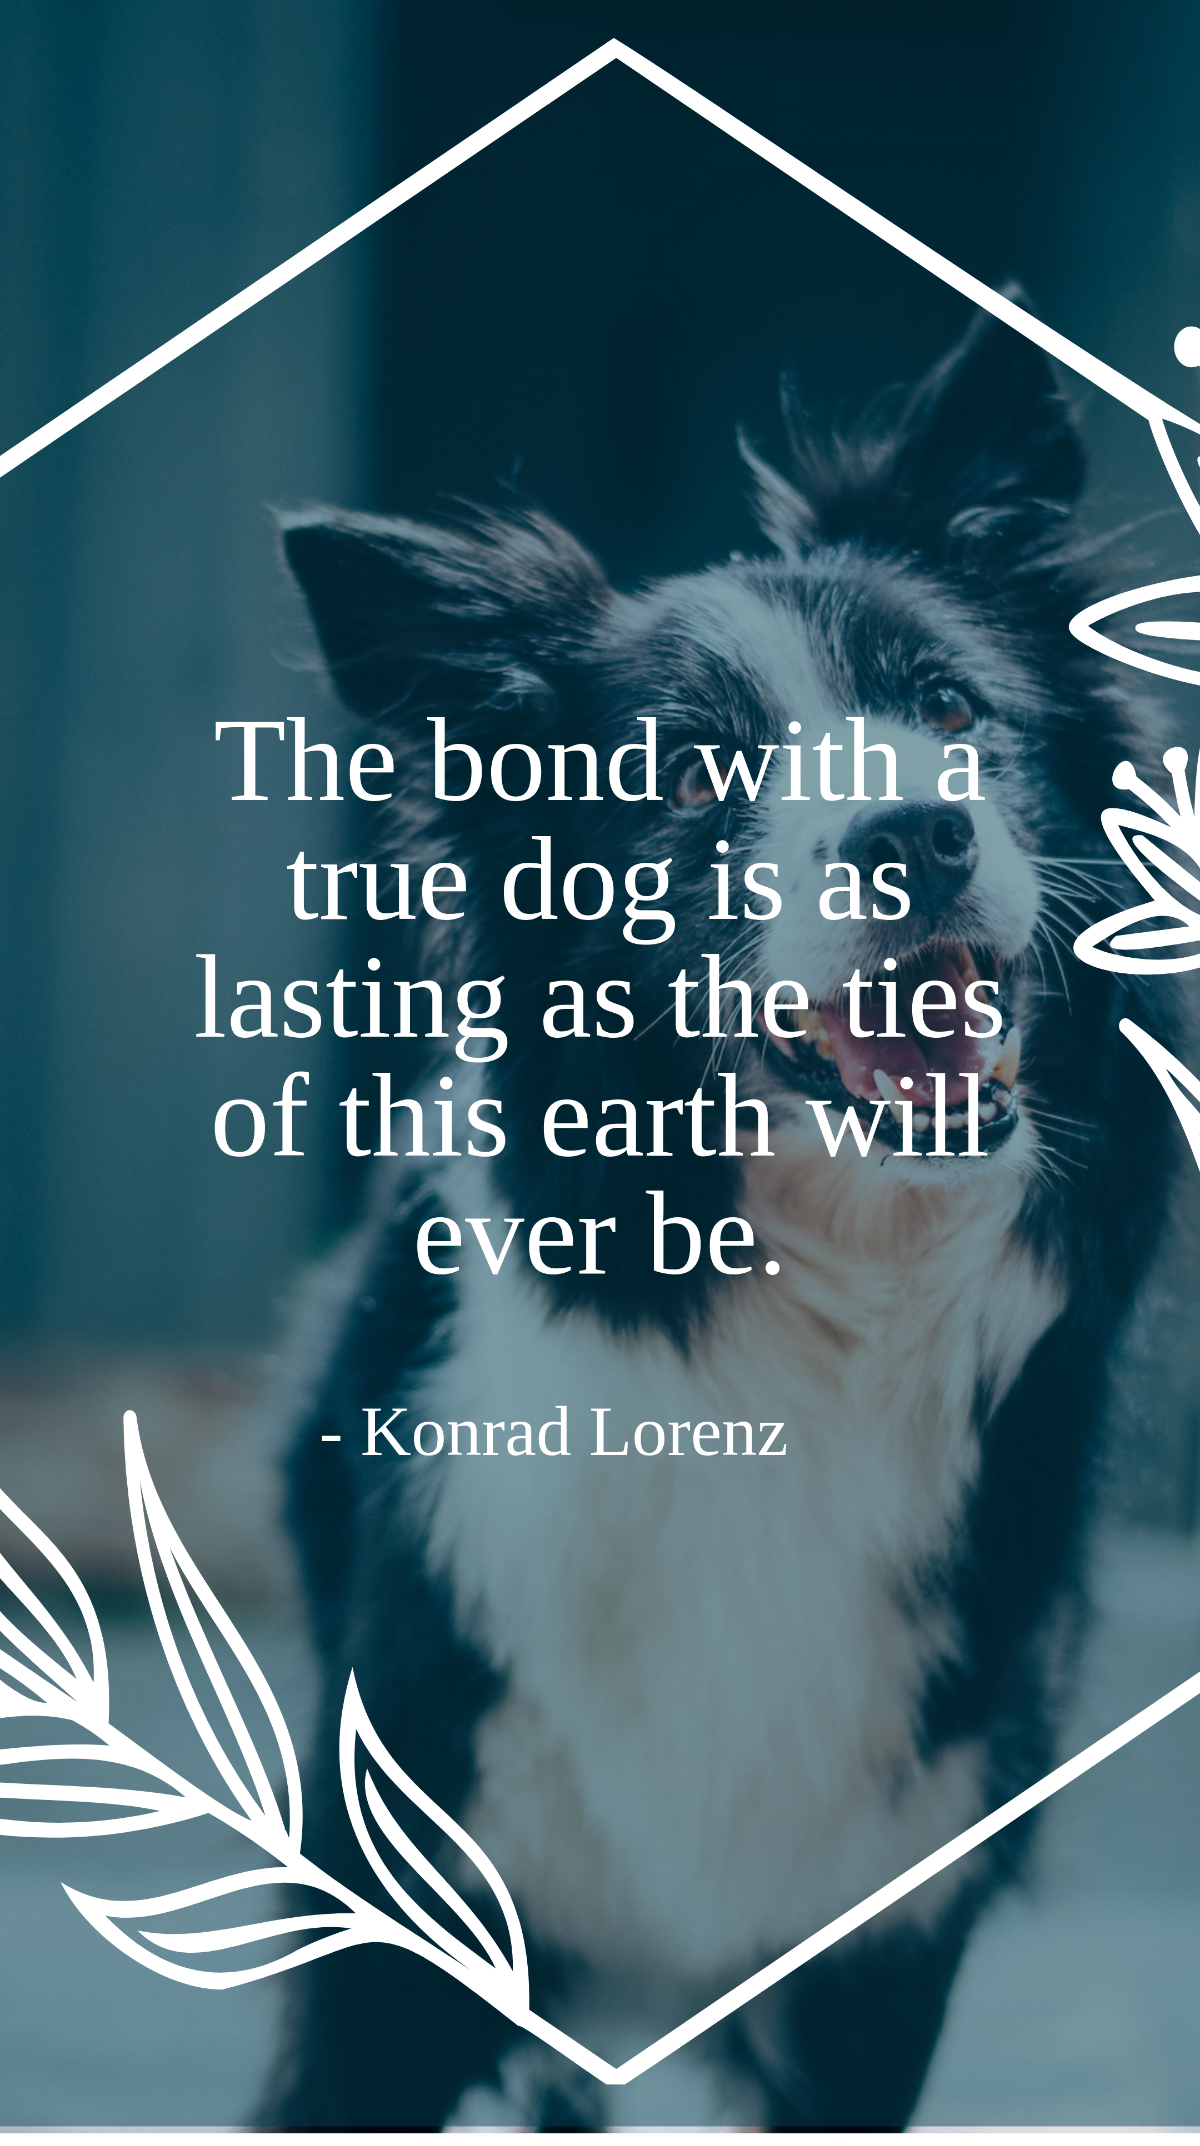 Konrad Lorenz - The bond with a true dog is as lasting as the ties of this earth will ever be.